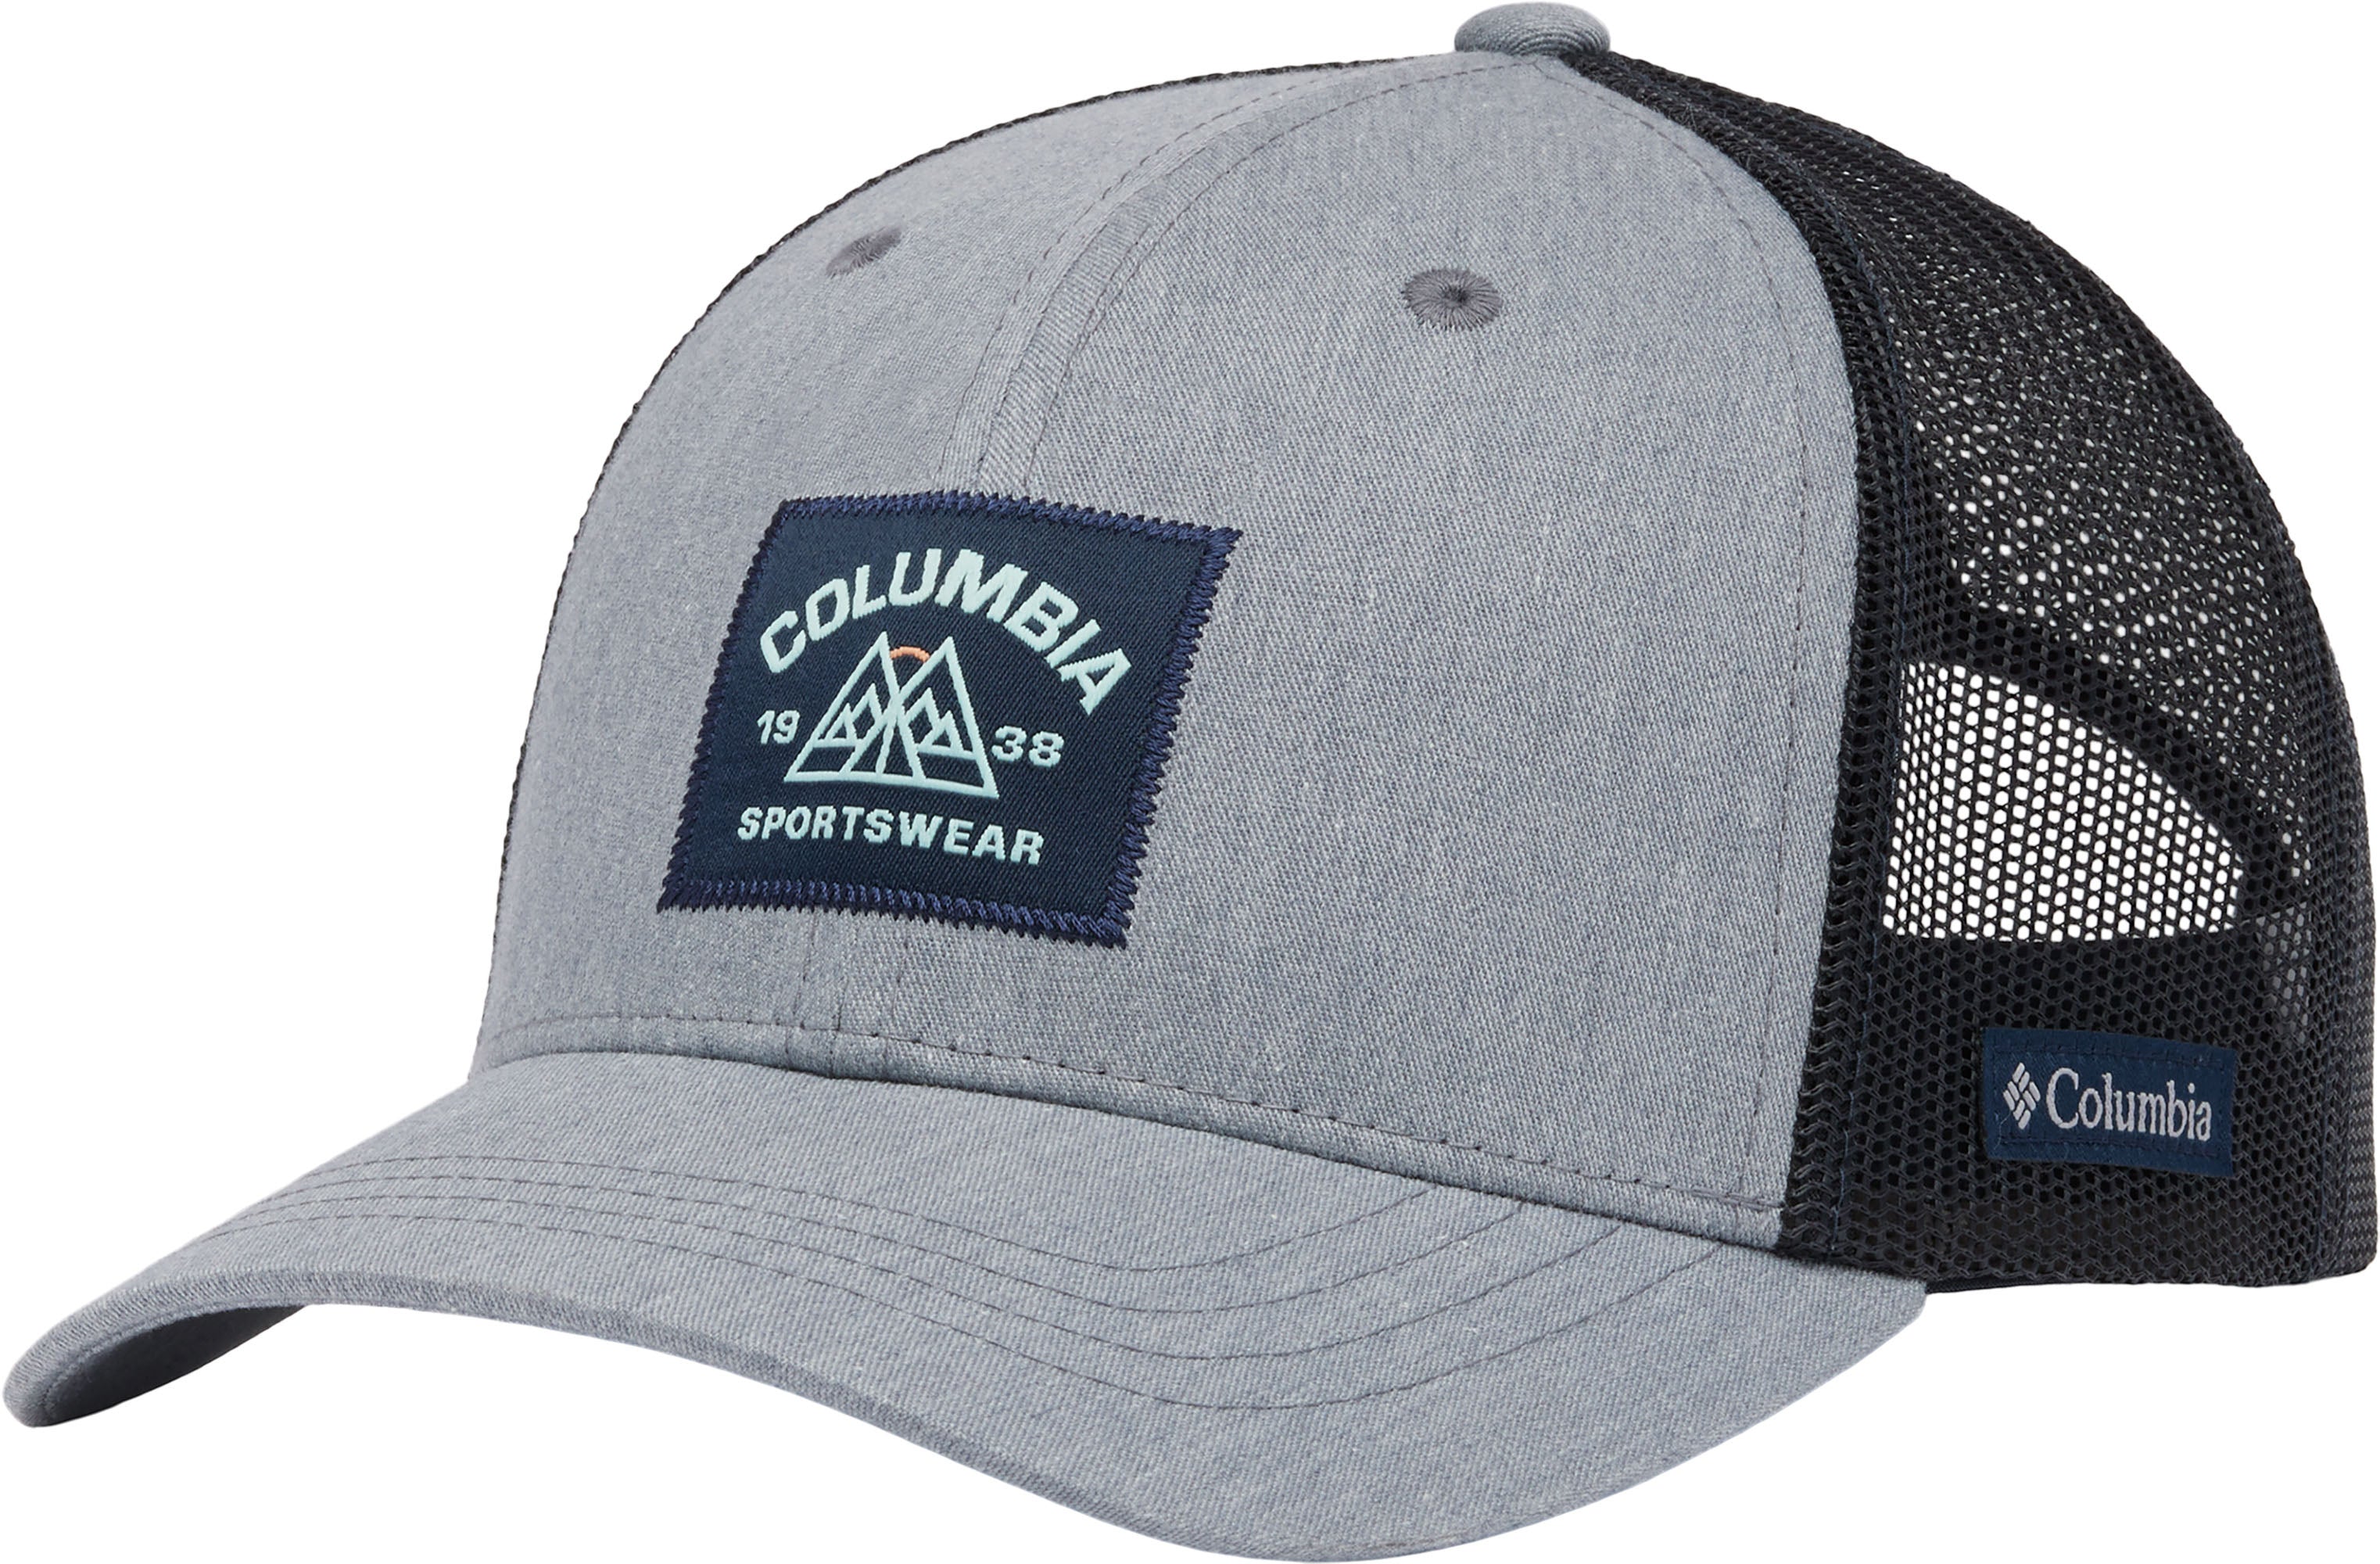 Columbia Heather Grey/Collegiate Navy Youth Snap Back Cap